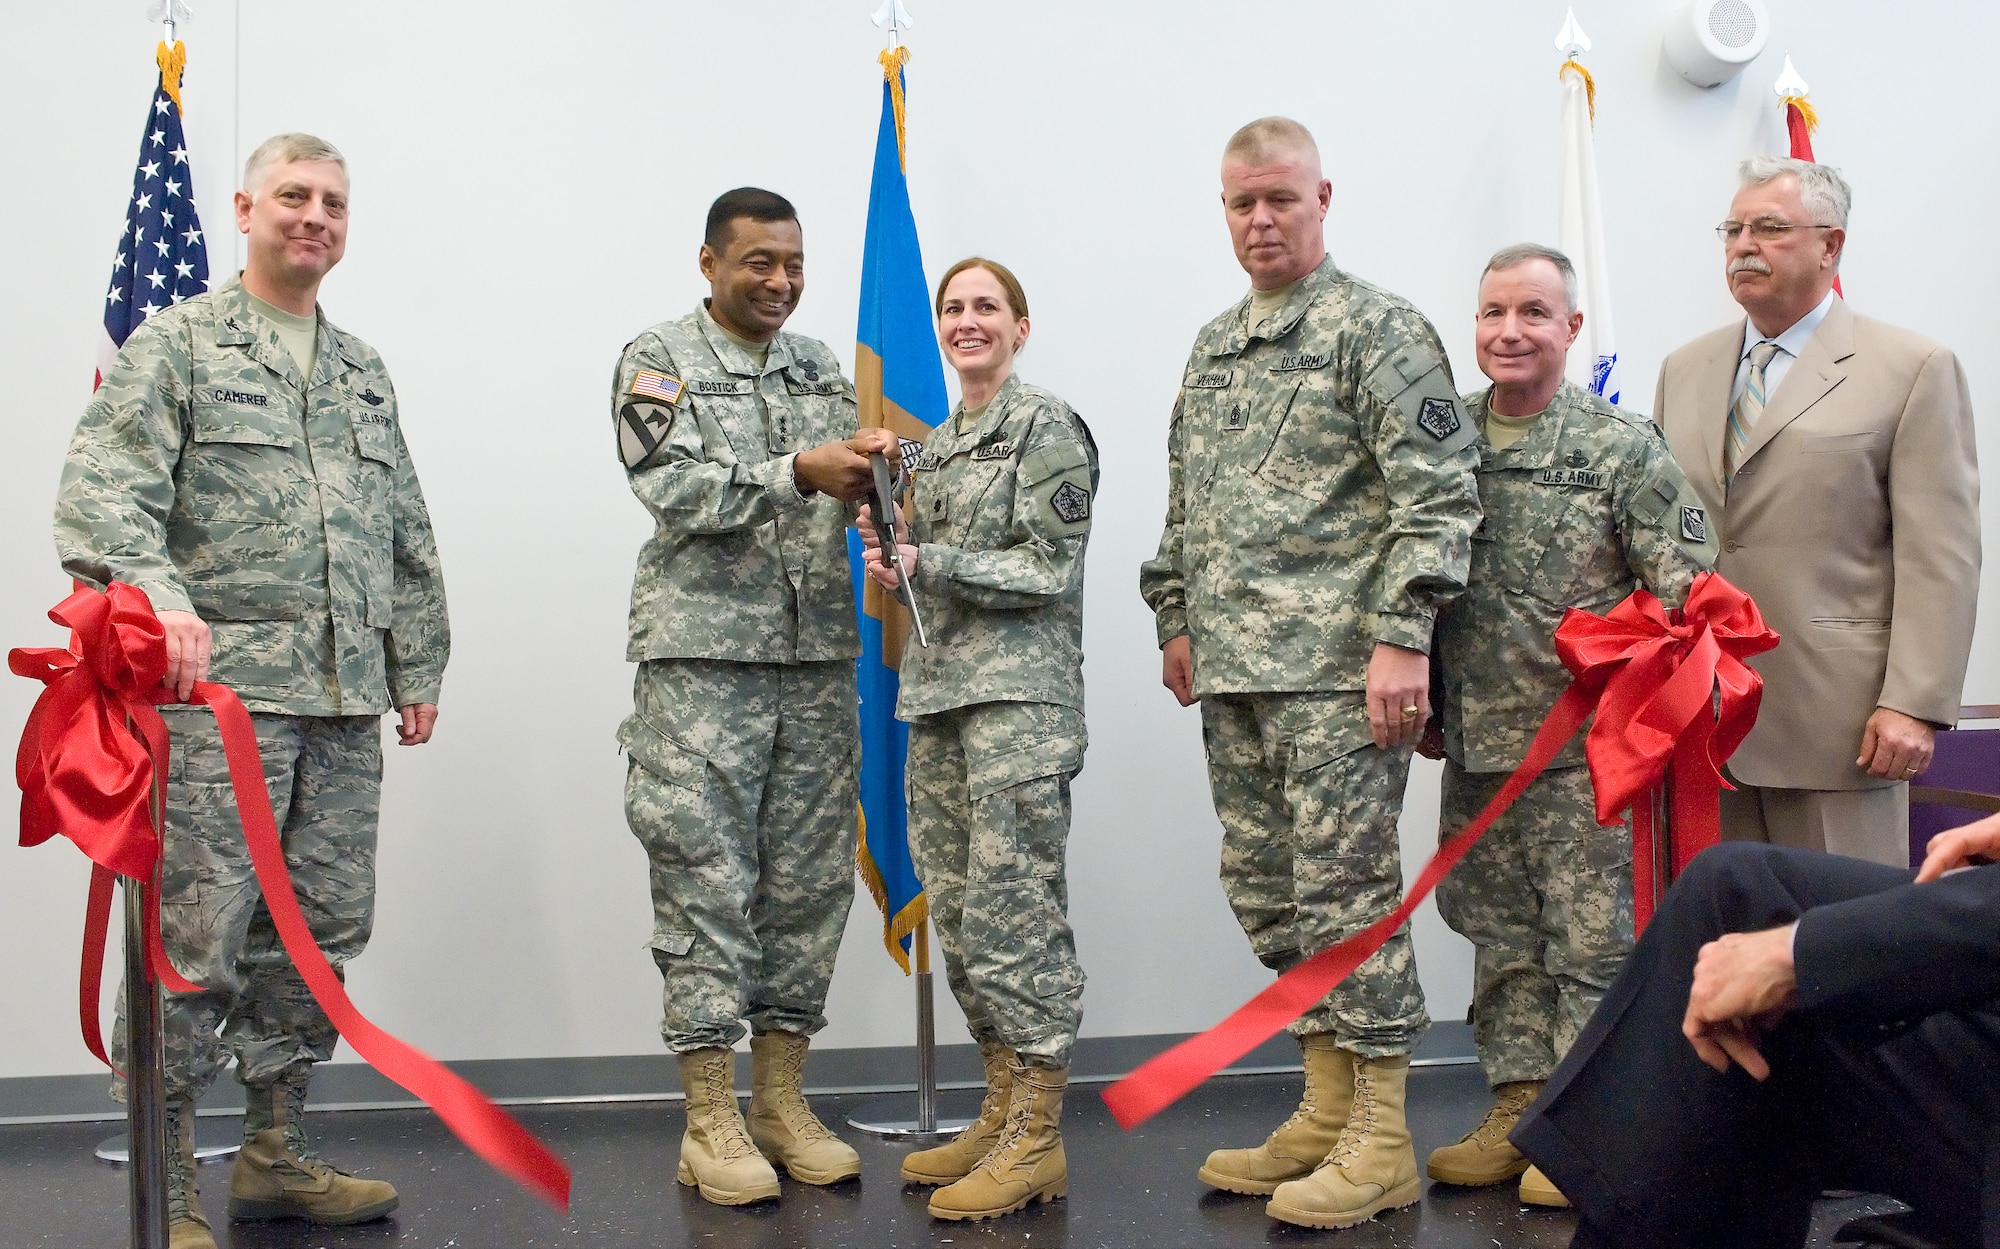 Col. Mark Camerer, left, Lt. Gen. Thomas Bostick, Lt. Col. Kelly Kyburz, 1st Sgt.  Alfred Venham, Maj. Gen. Bo Temple and Mr. Stephen Mockbee stand for the ribbon cutting, April 14, 2011, signaling the opening of the Joint Personal Effects Depot at Dover Air Force Base, Del. (U.S. Air Force photo by Roland Balik)